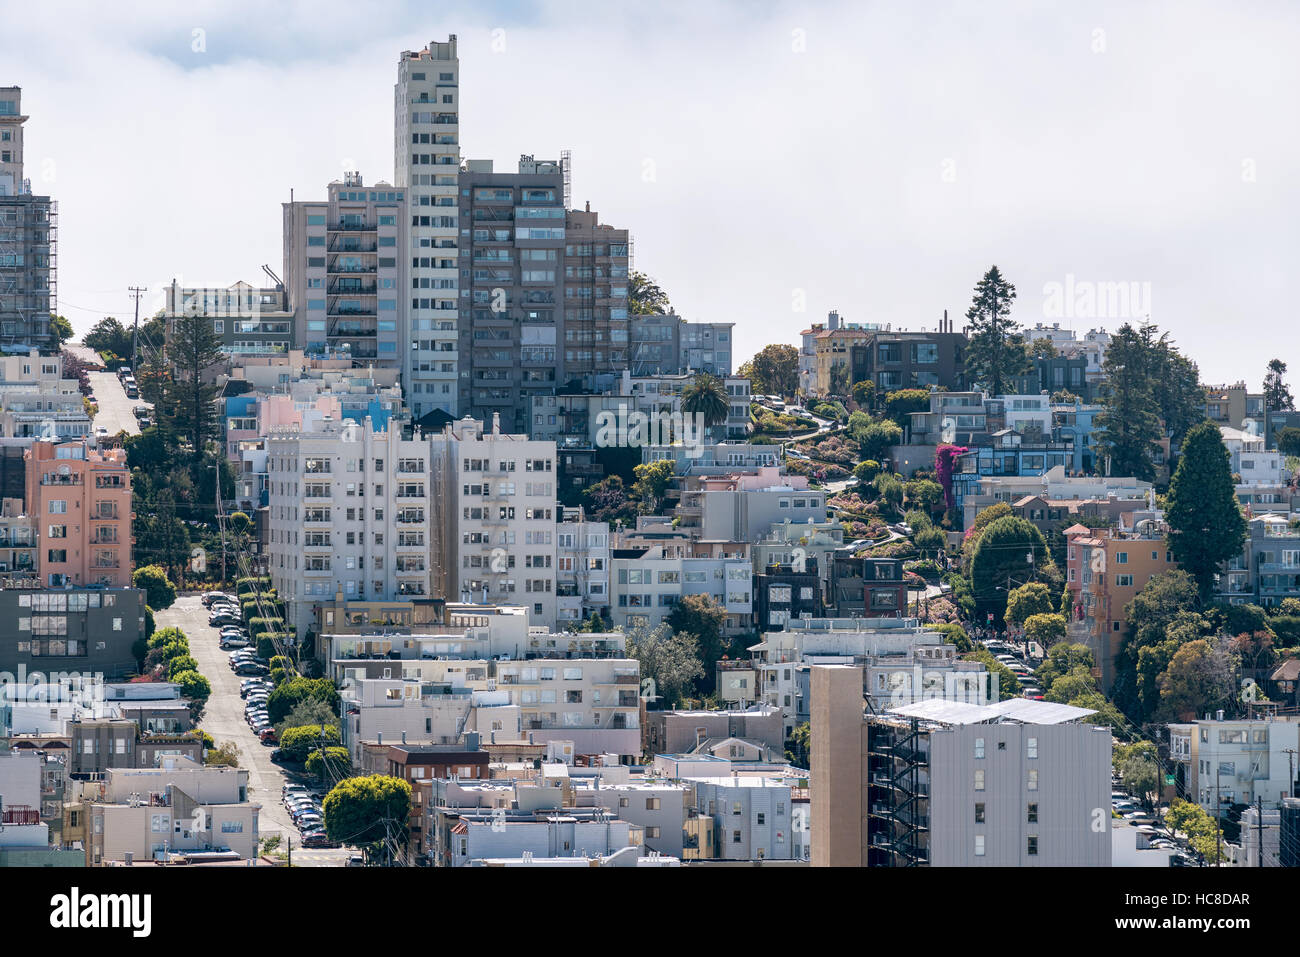 Lombard Street seen from a distance, San Francisco, California, United States of America, North America Stock Photo